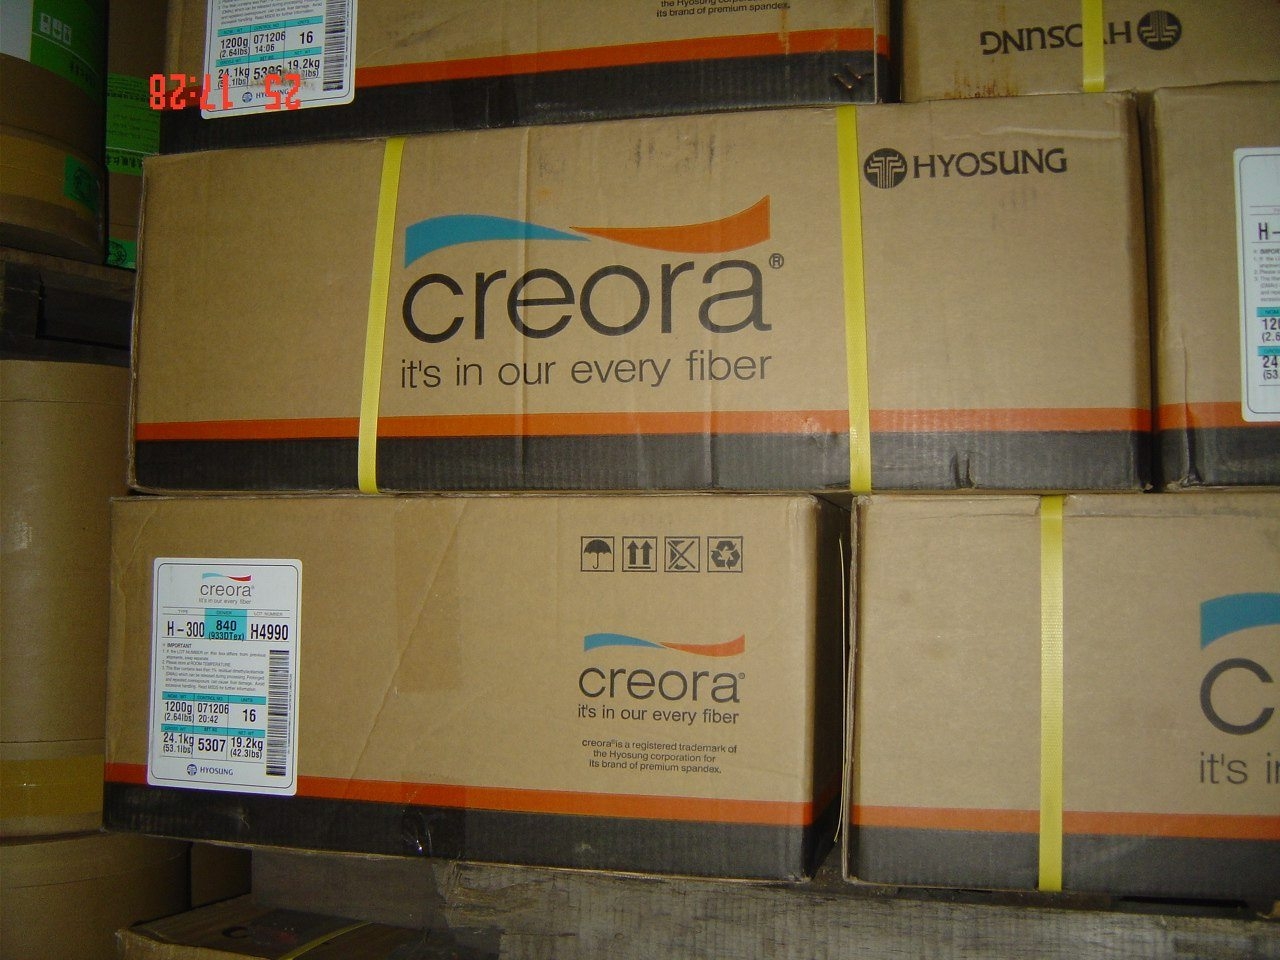 Hyosung and Creora Brand 40d Spandex Yarn - Top Choice for Quality